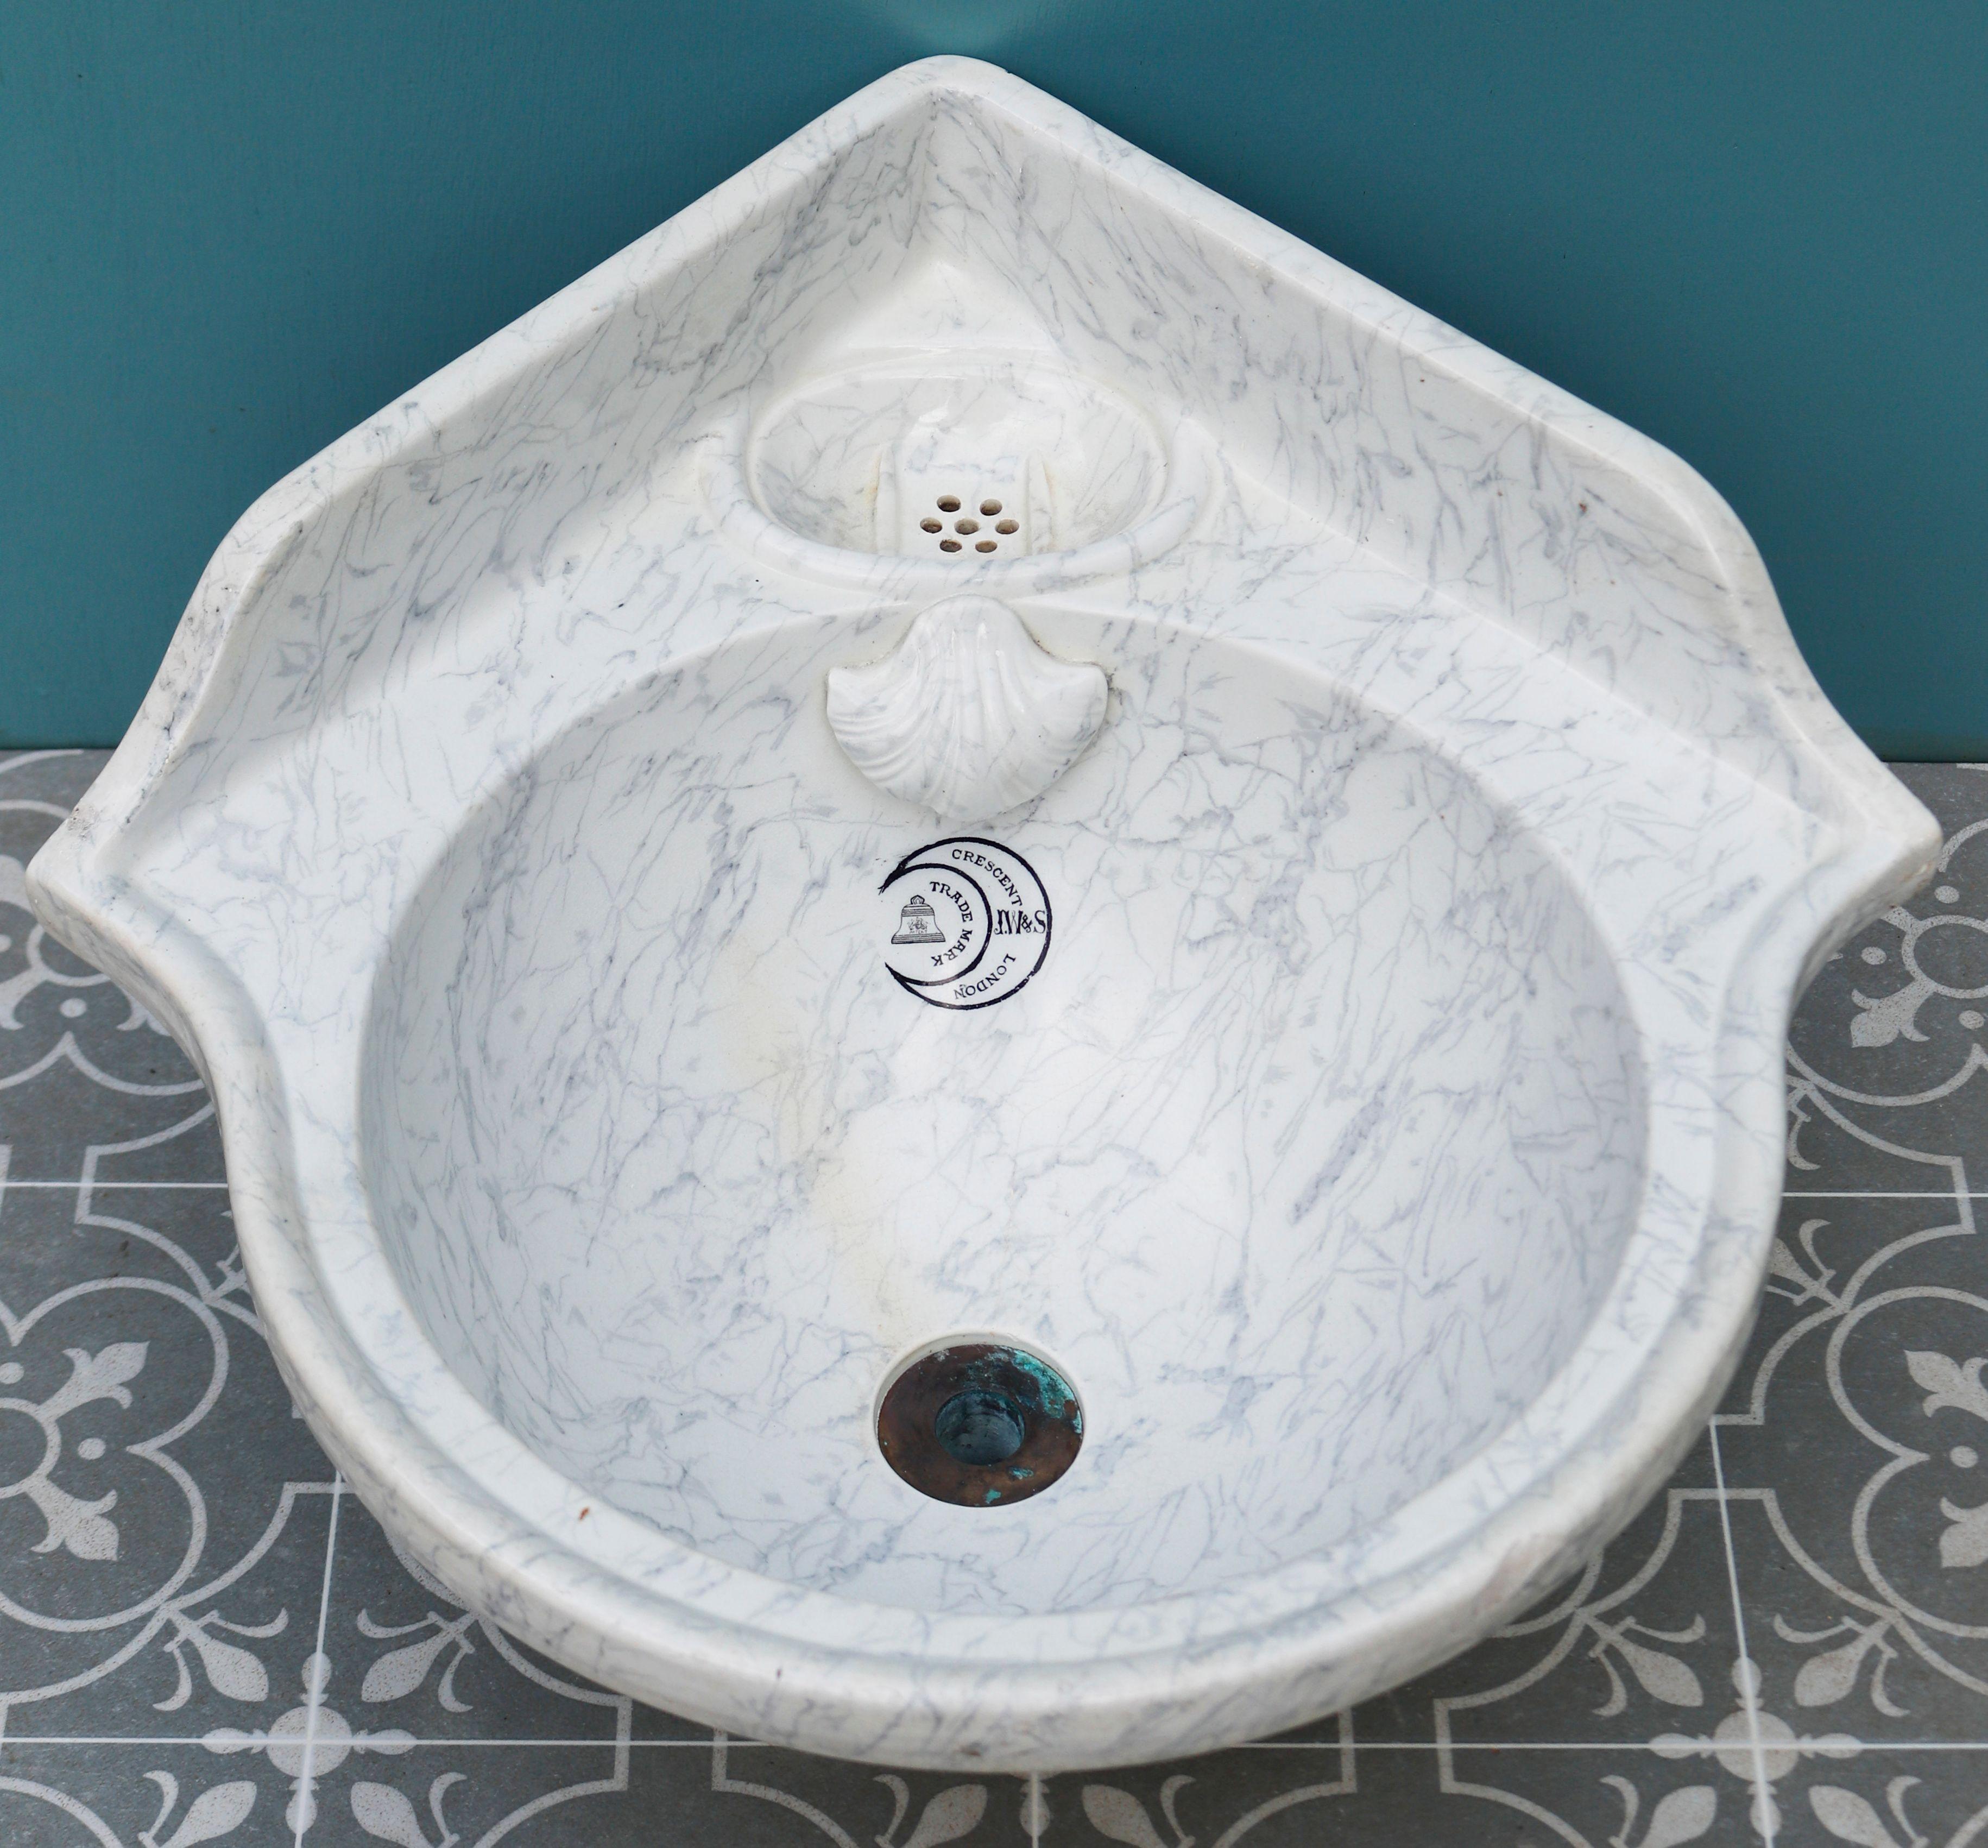 Small Antique Marbleised Sink. A small corner sink or basin with a simulated marble finish beneath the glaze. This has a shell shaped overflow cover and a soap dish with drain holes.
 
Additional dimensions
 
Overall height 30 cm
 
Front to back 51